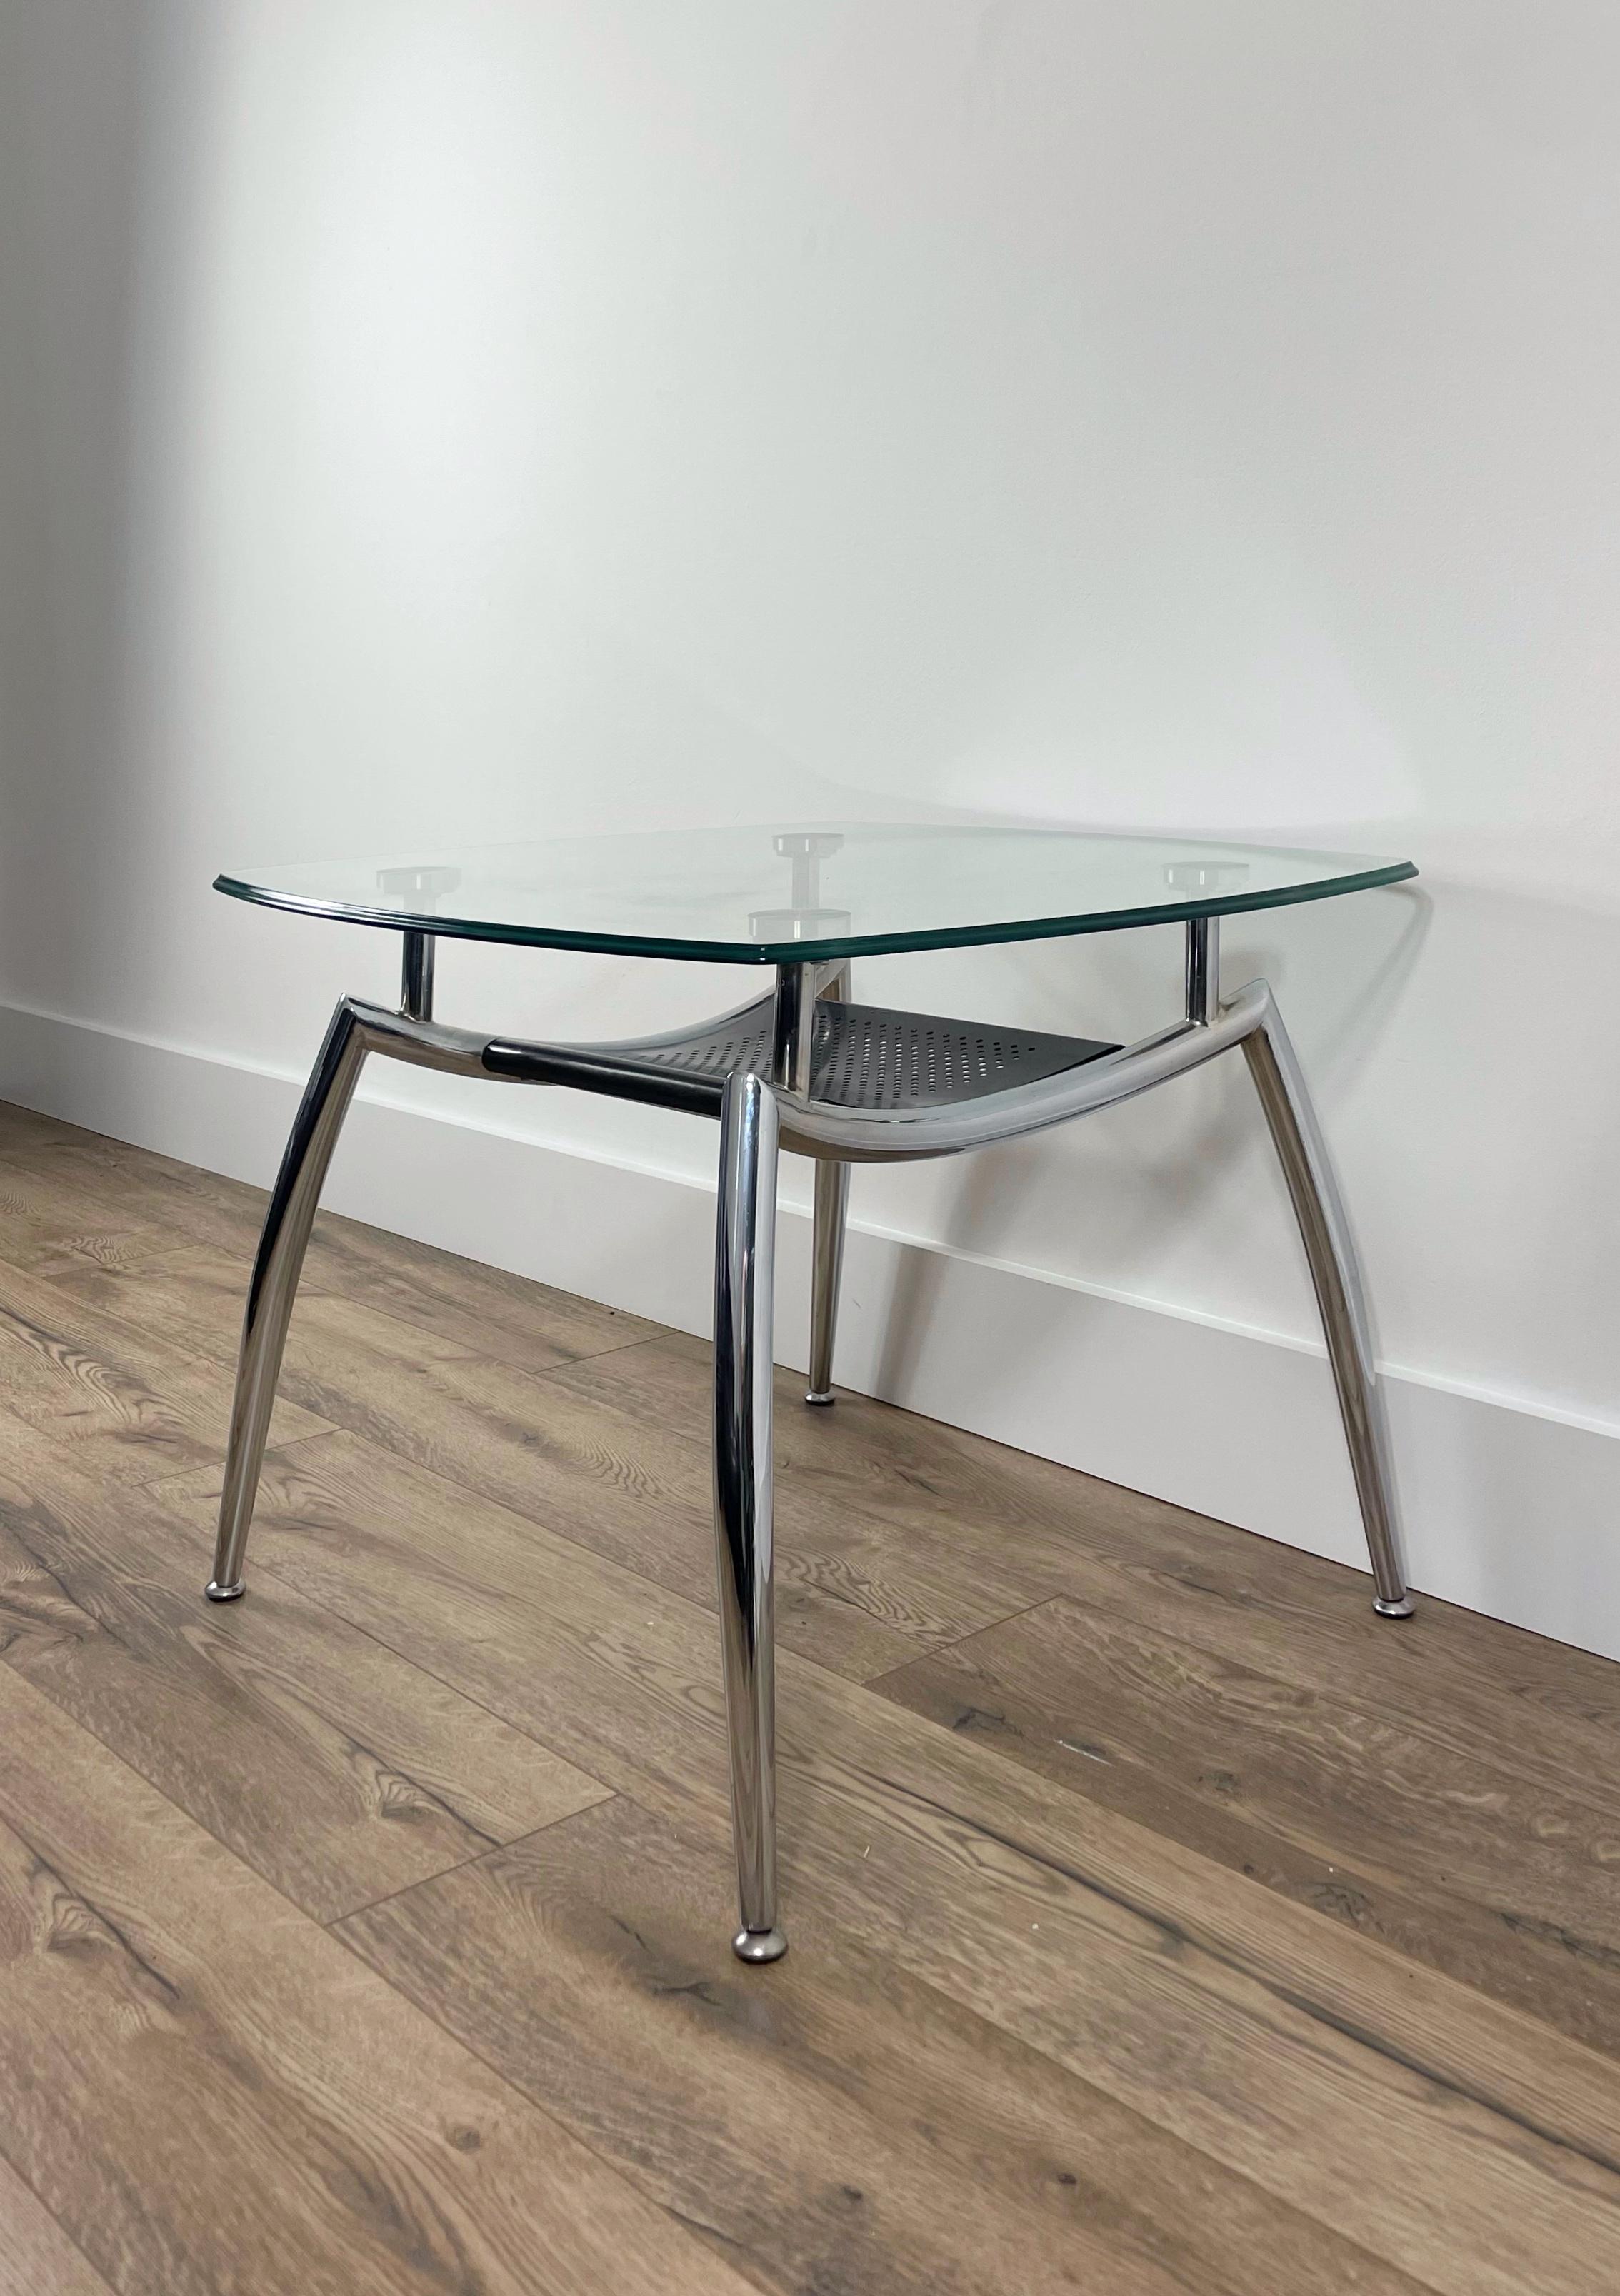 This beautiful and unique coffee table was manufactured in the 70s. The shape of this coffee table is extremely unique and puts a modern twist on this mid century piece. The glass and chrome is very cool and clean looking. This coffee table features